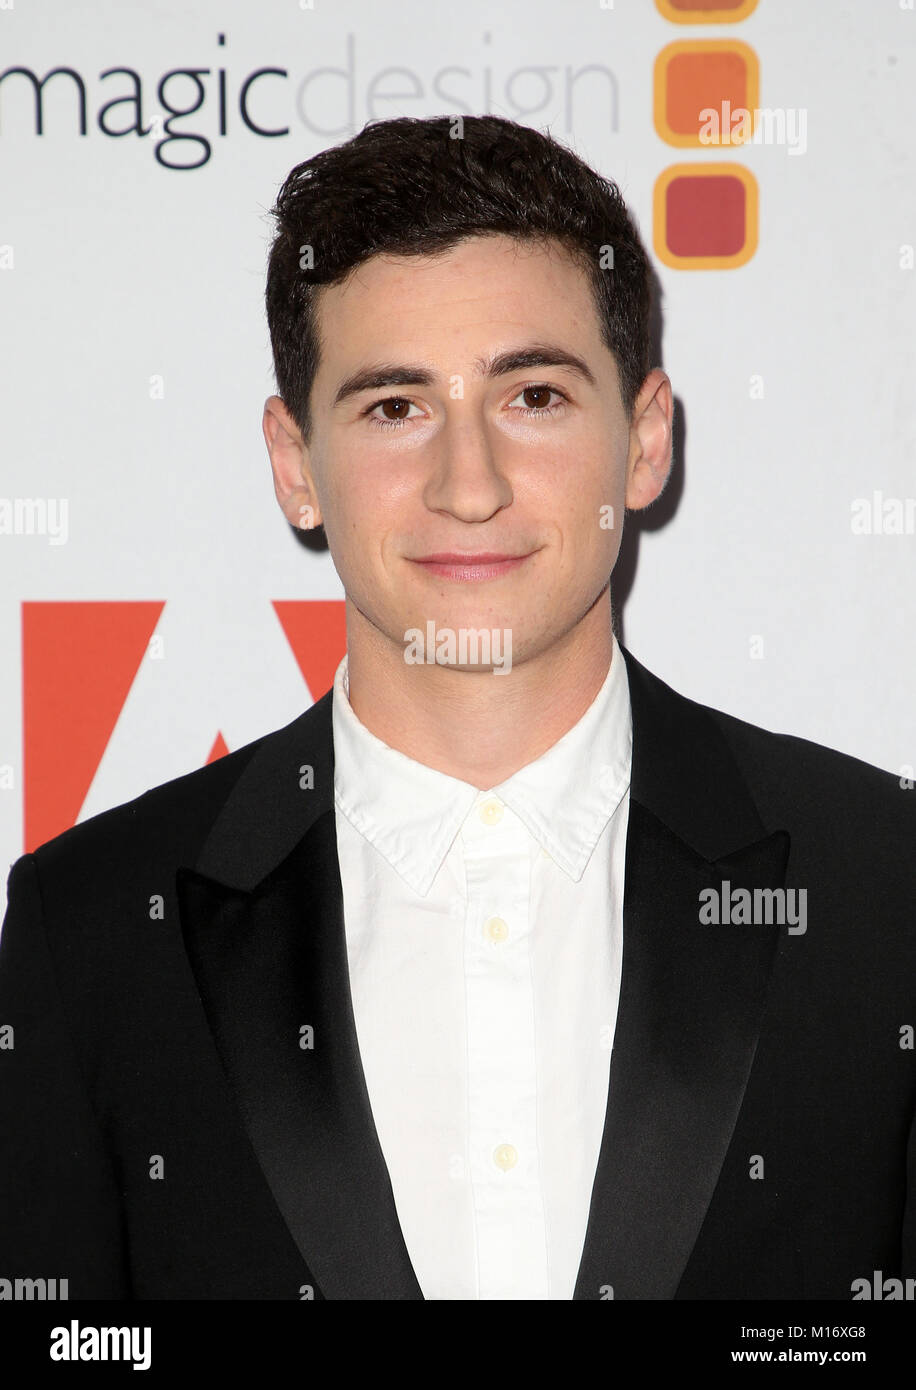 Beverly Hills, Ca. 26th Jan, 2018. Sam Lerner, at the 2018 ACE Eddie Awards at the Beverly Hilton Hotel in Beverly Hills, California on January 26, 2018. Credit: Faye Sadou/Media Punch/Alamy Live News Stock Photo